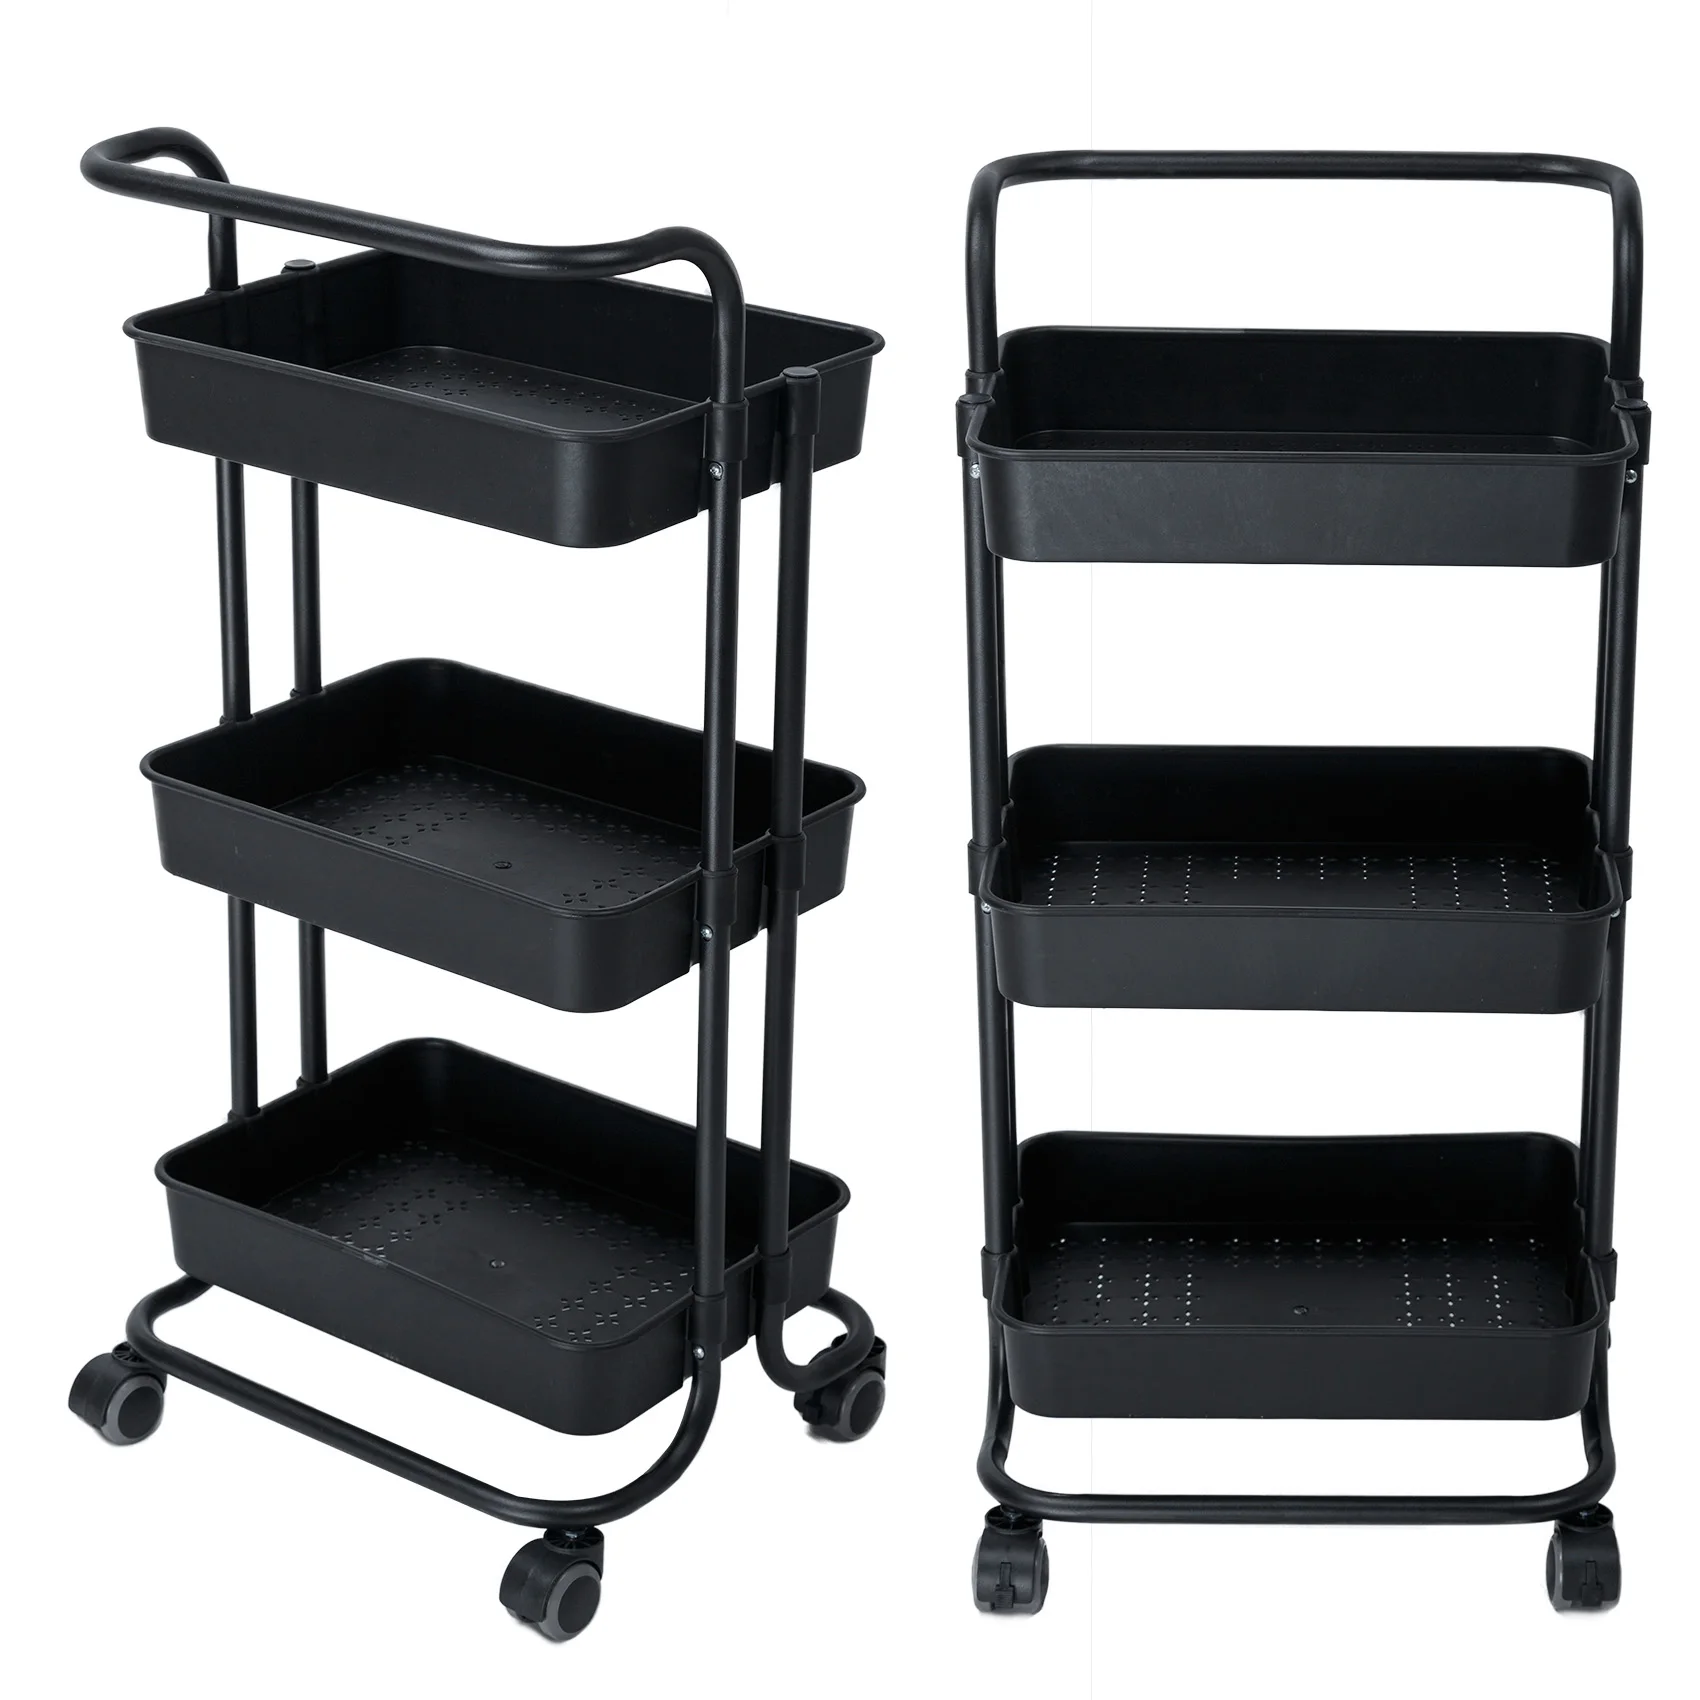 Cool Black SAYZH 3 Tier Rolling Utility Cart with Wheels Mobile Metal Storage Organizer Shelf Service Cart Easy Assembly for Laundry Kitchen Office Bathroom 